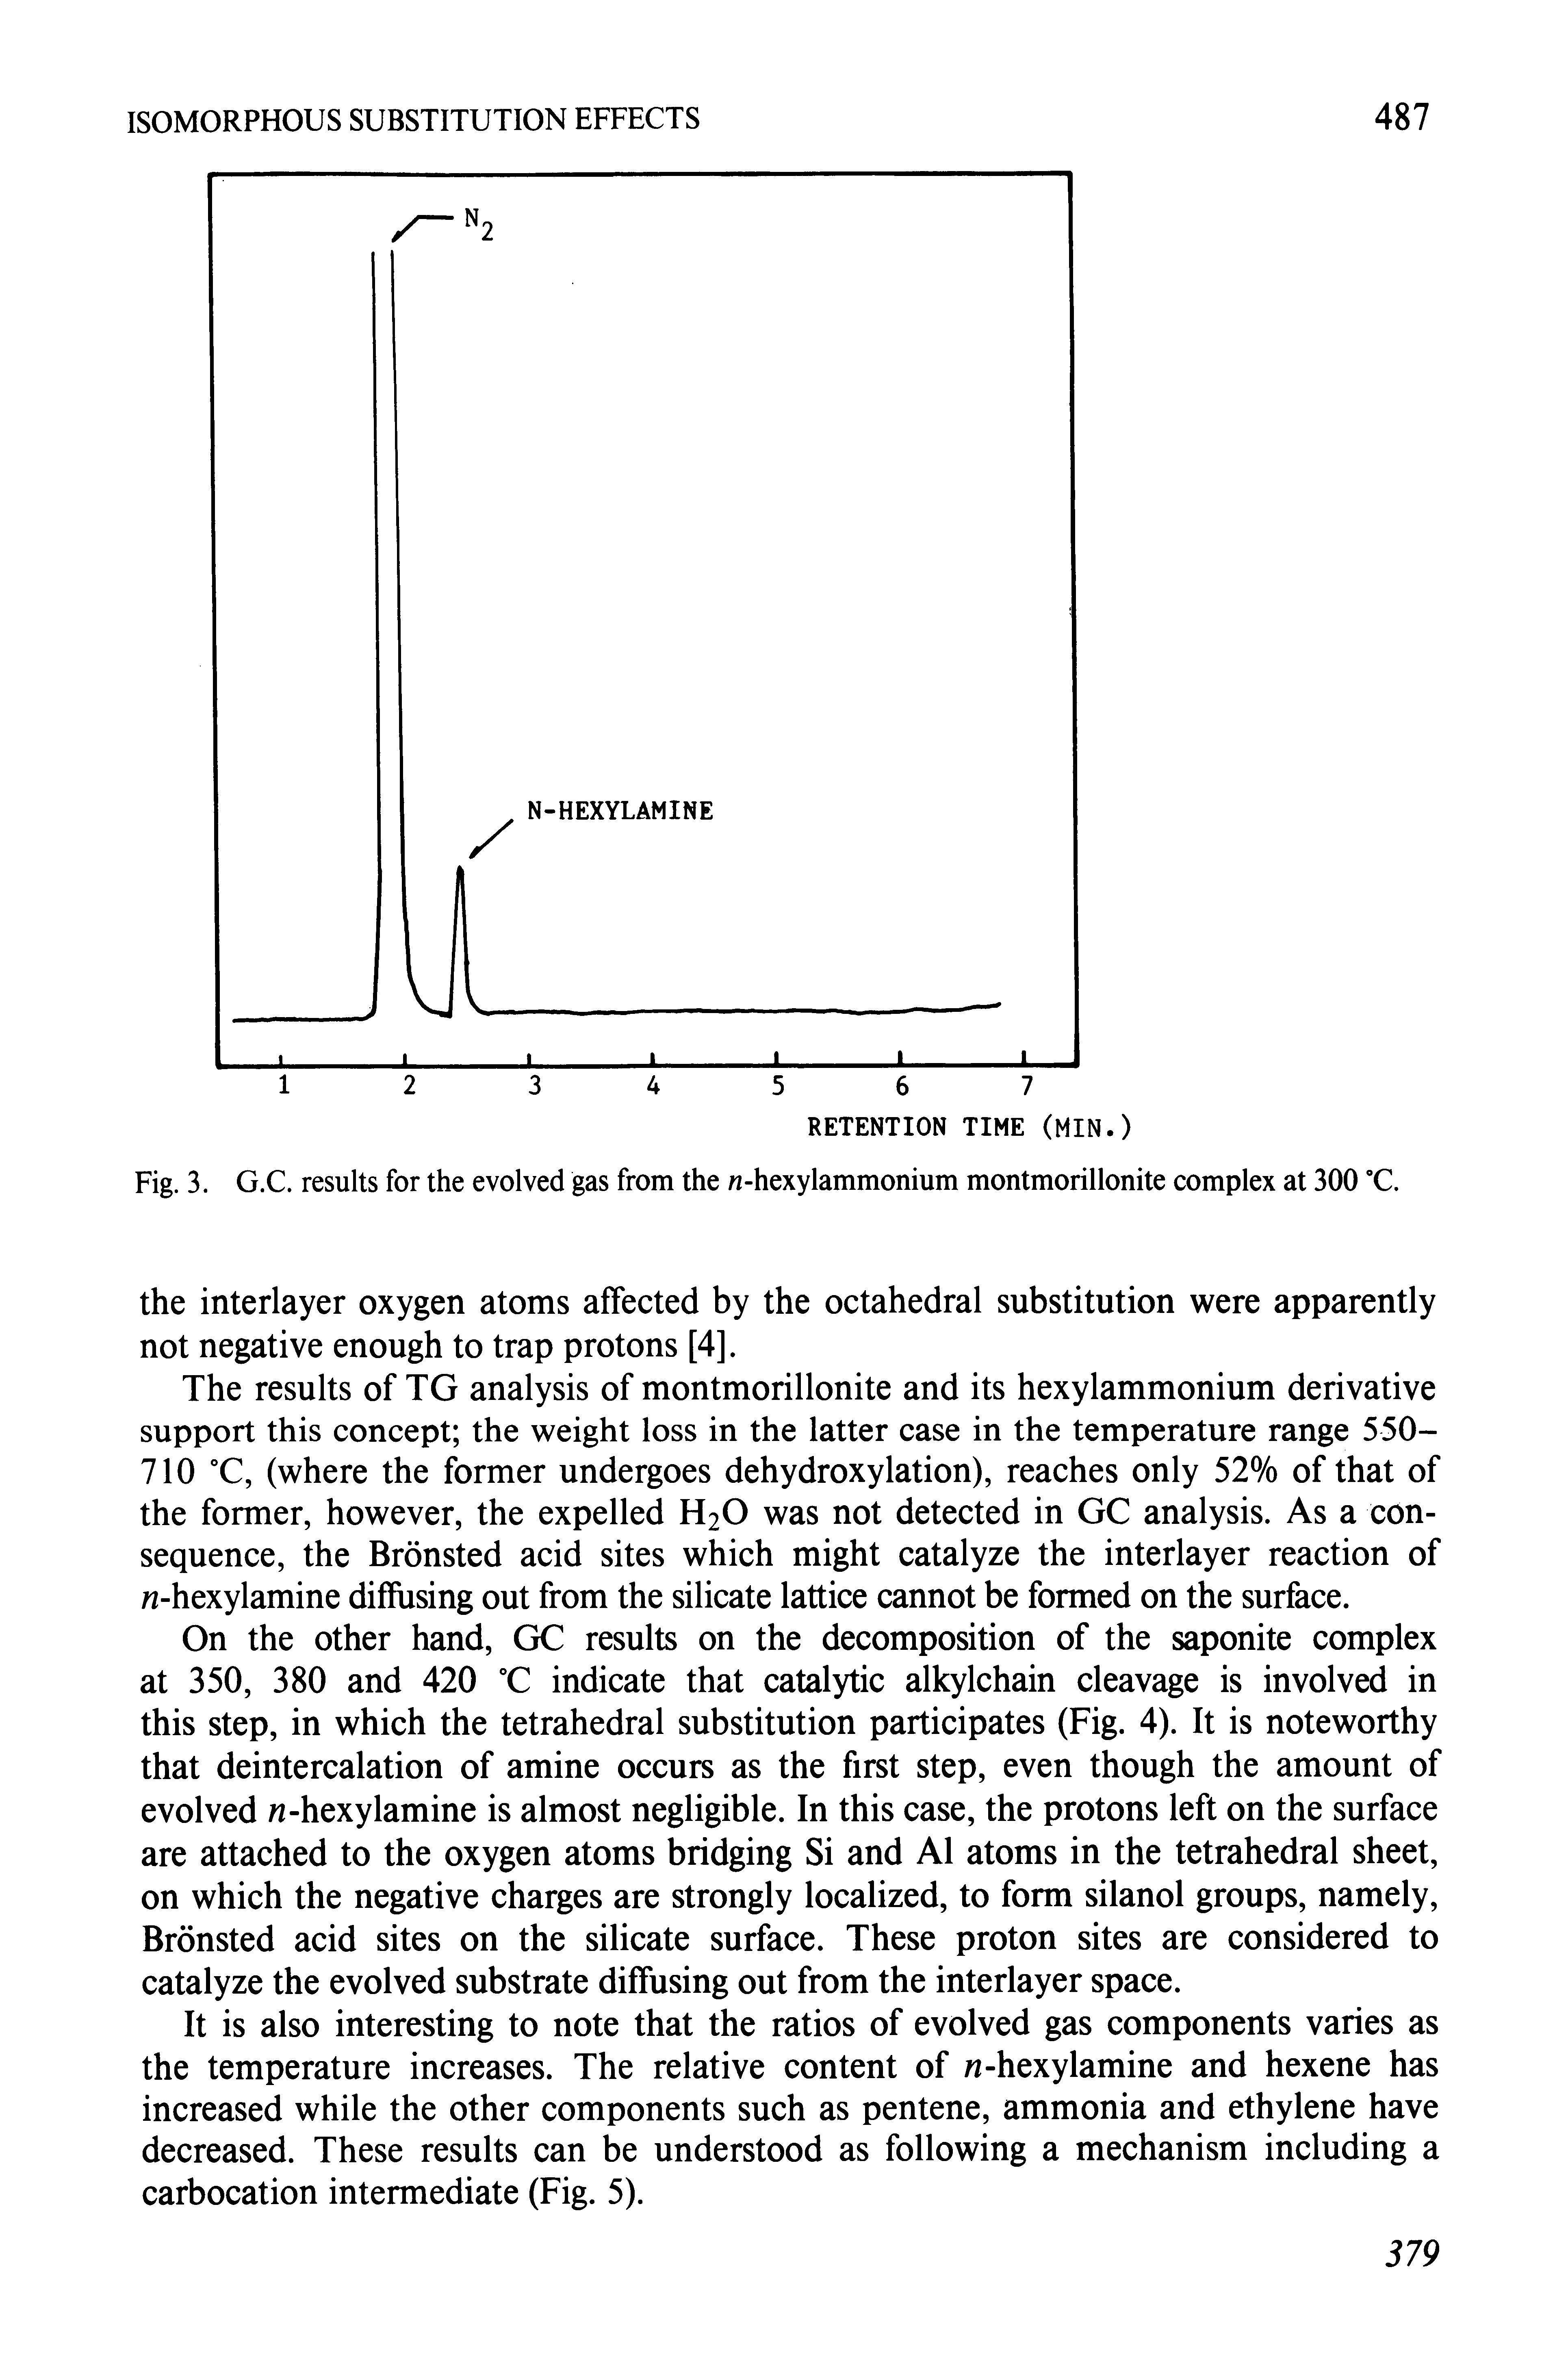 Fig. 3. G.C. results for the evolved gas from the n-hexylammonium montmorillonite complex at 300 "C.